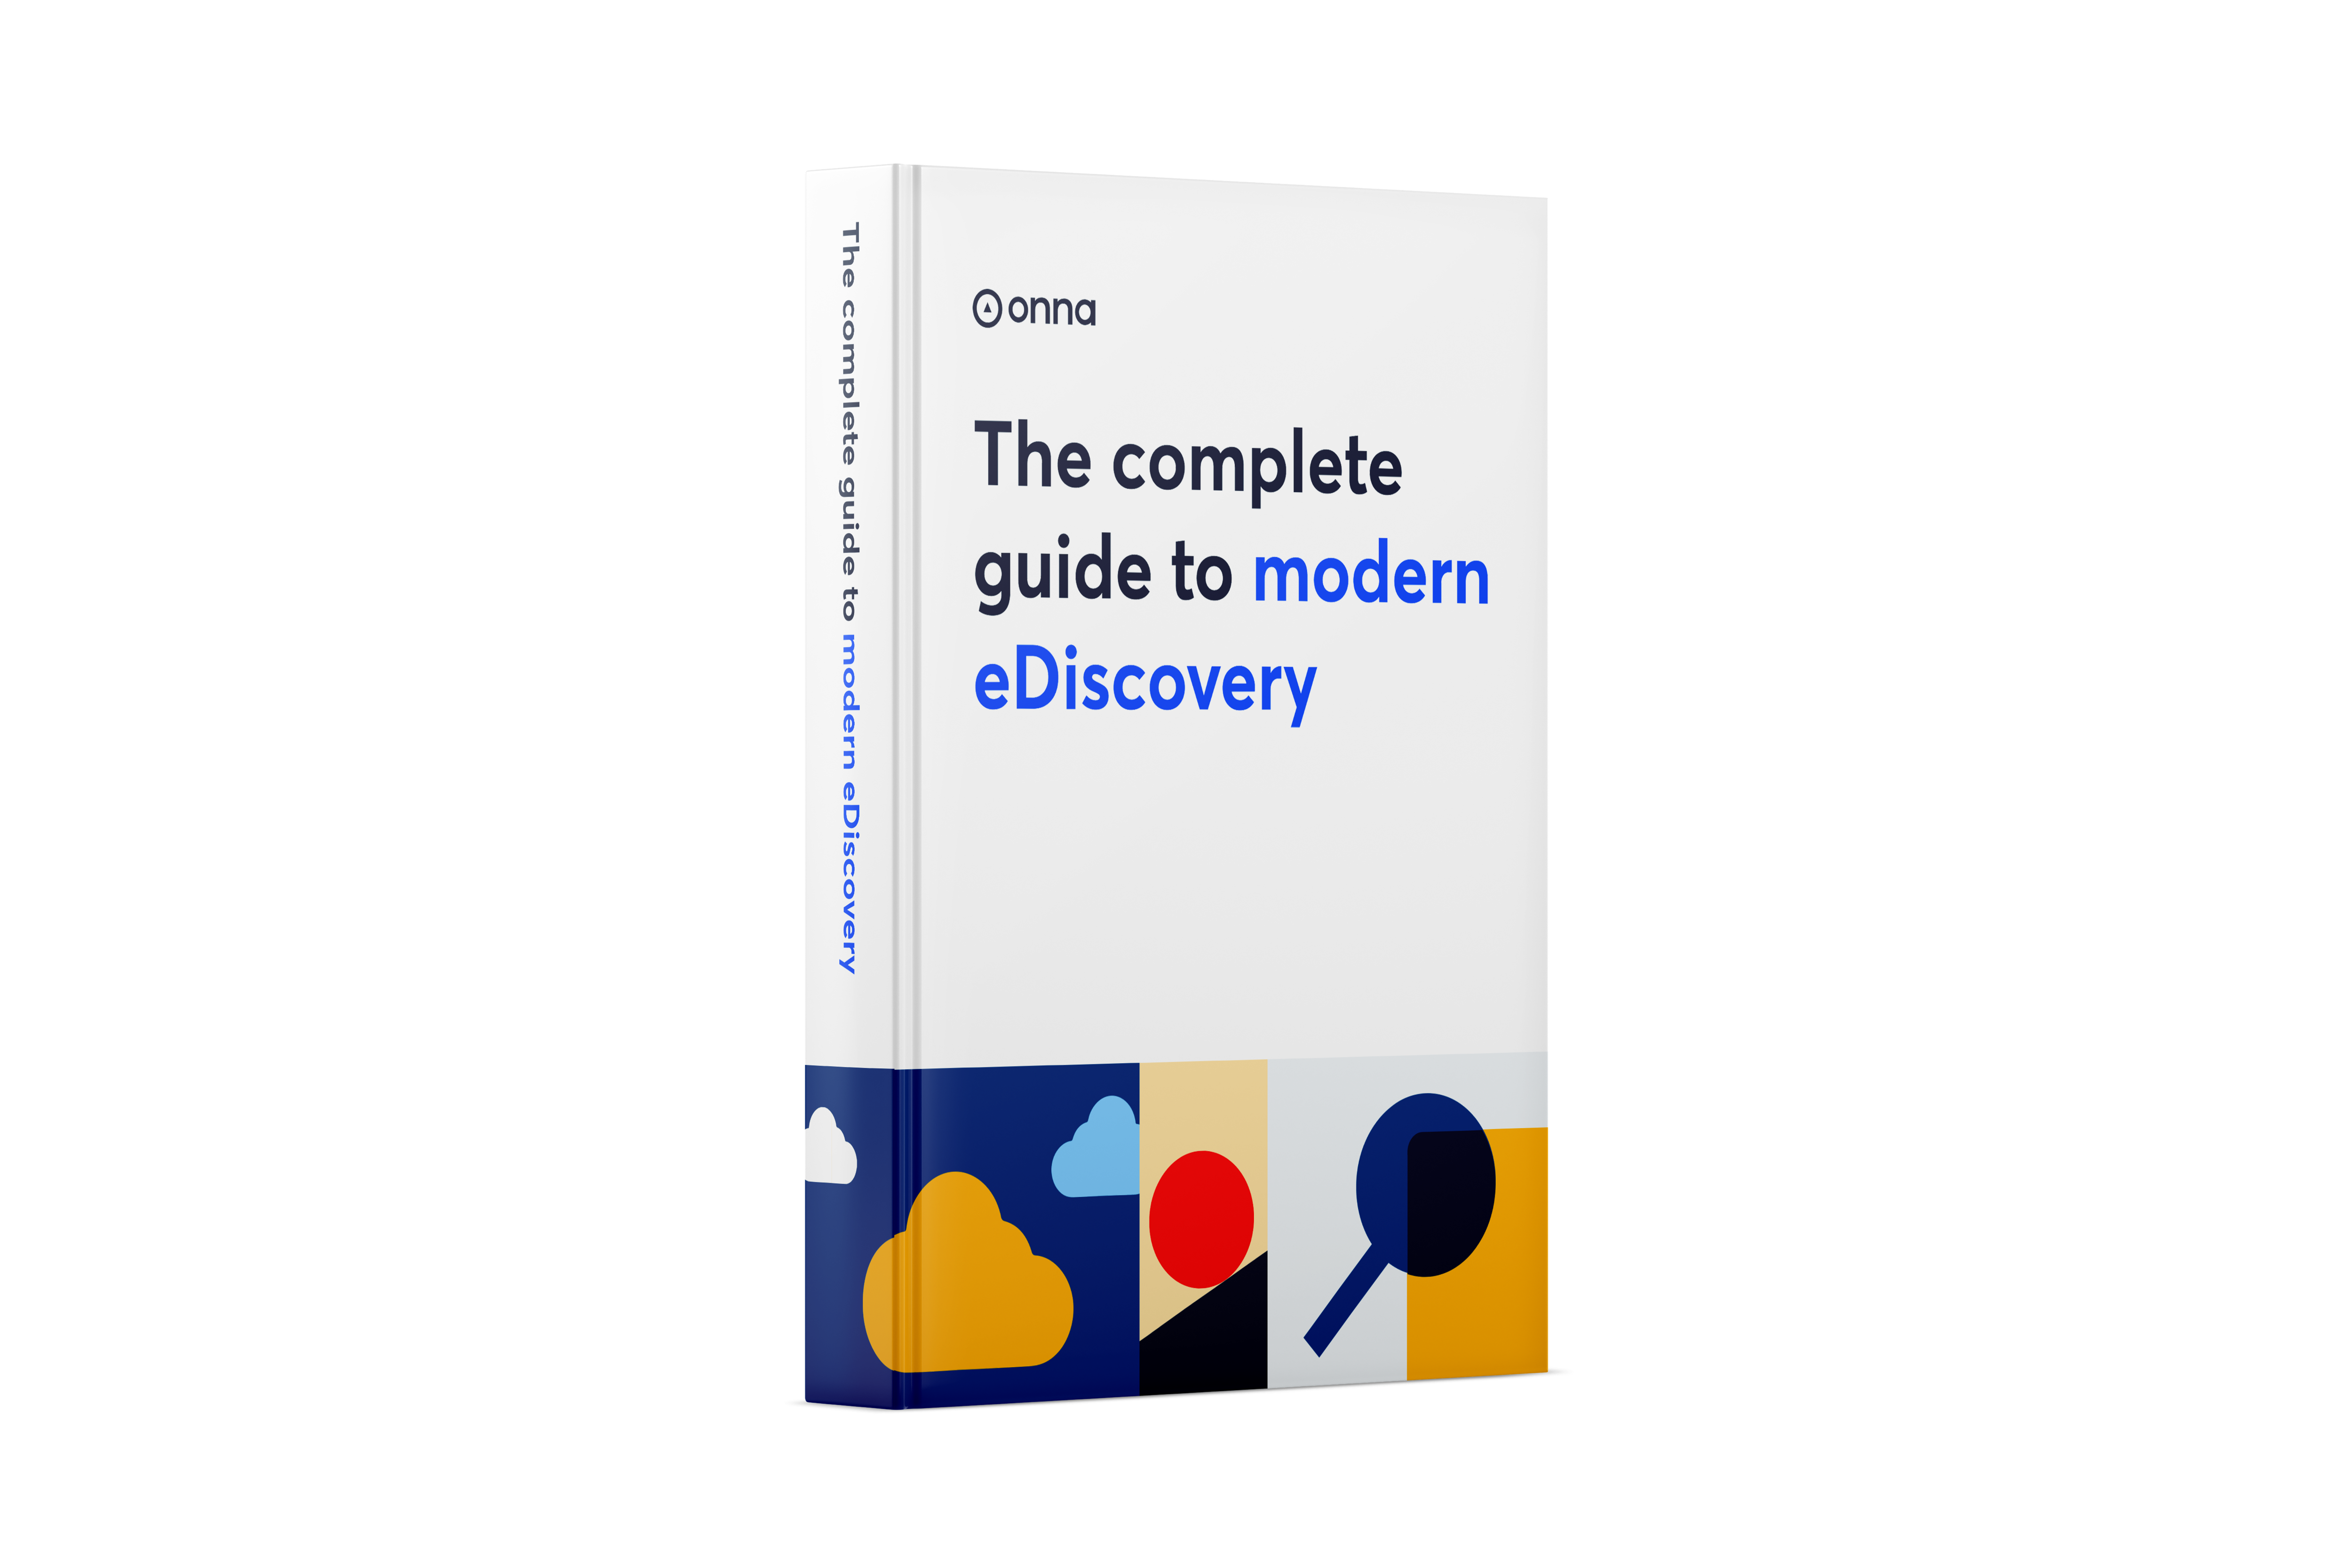 cover-image-modern-ediscovery-guide-transparent